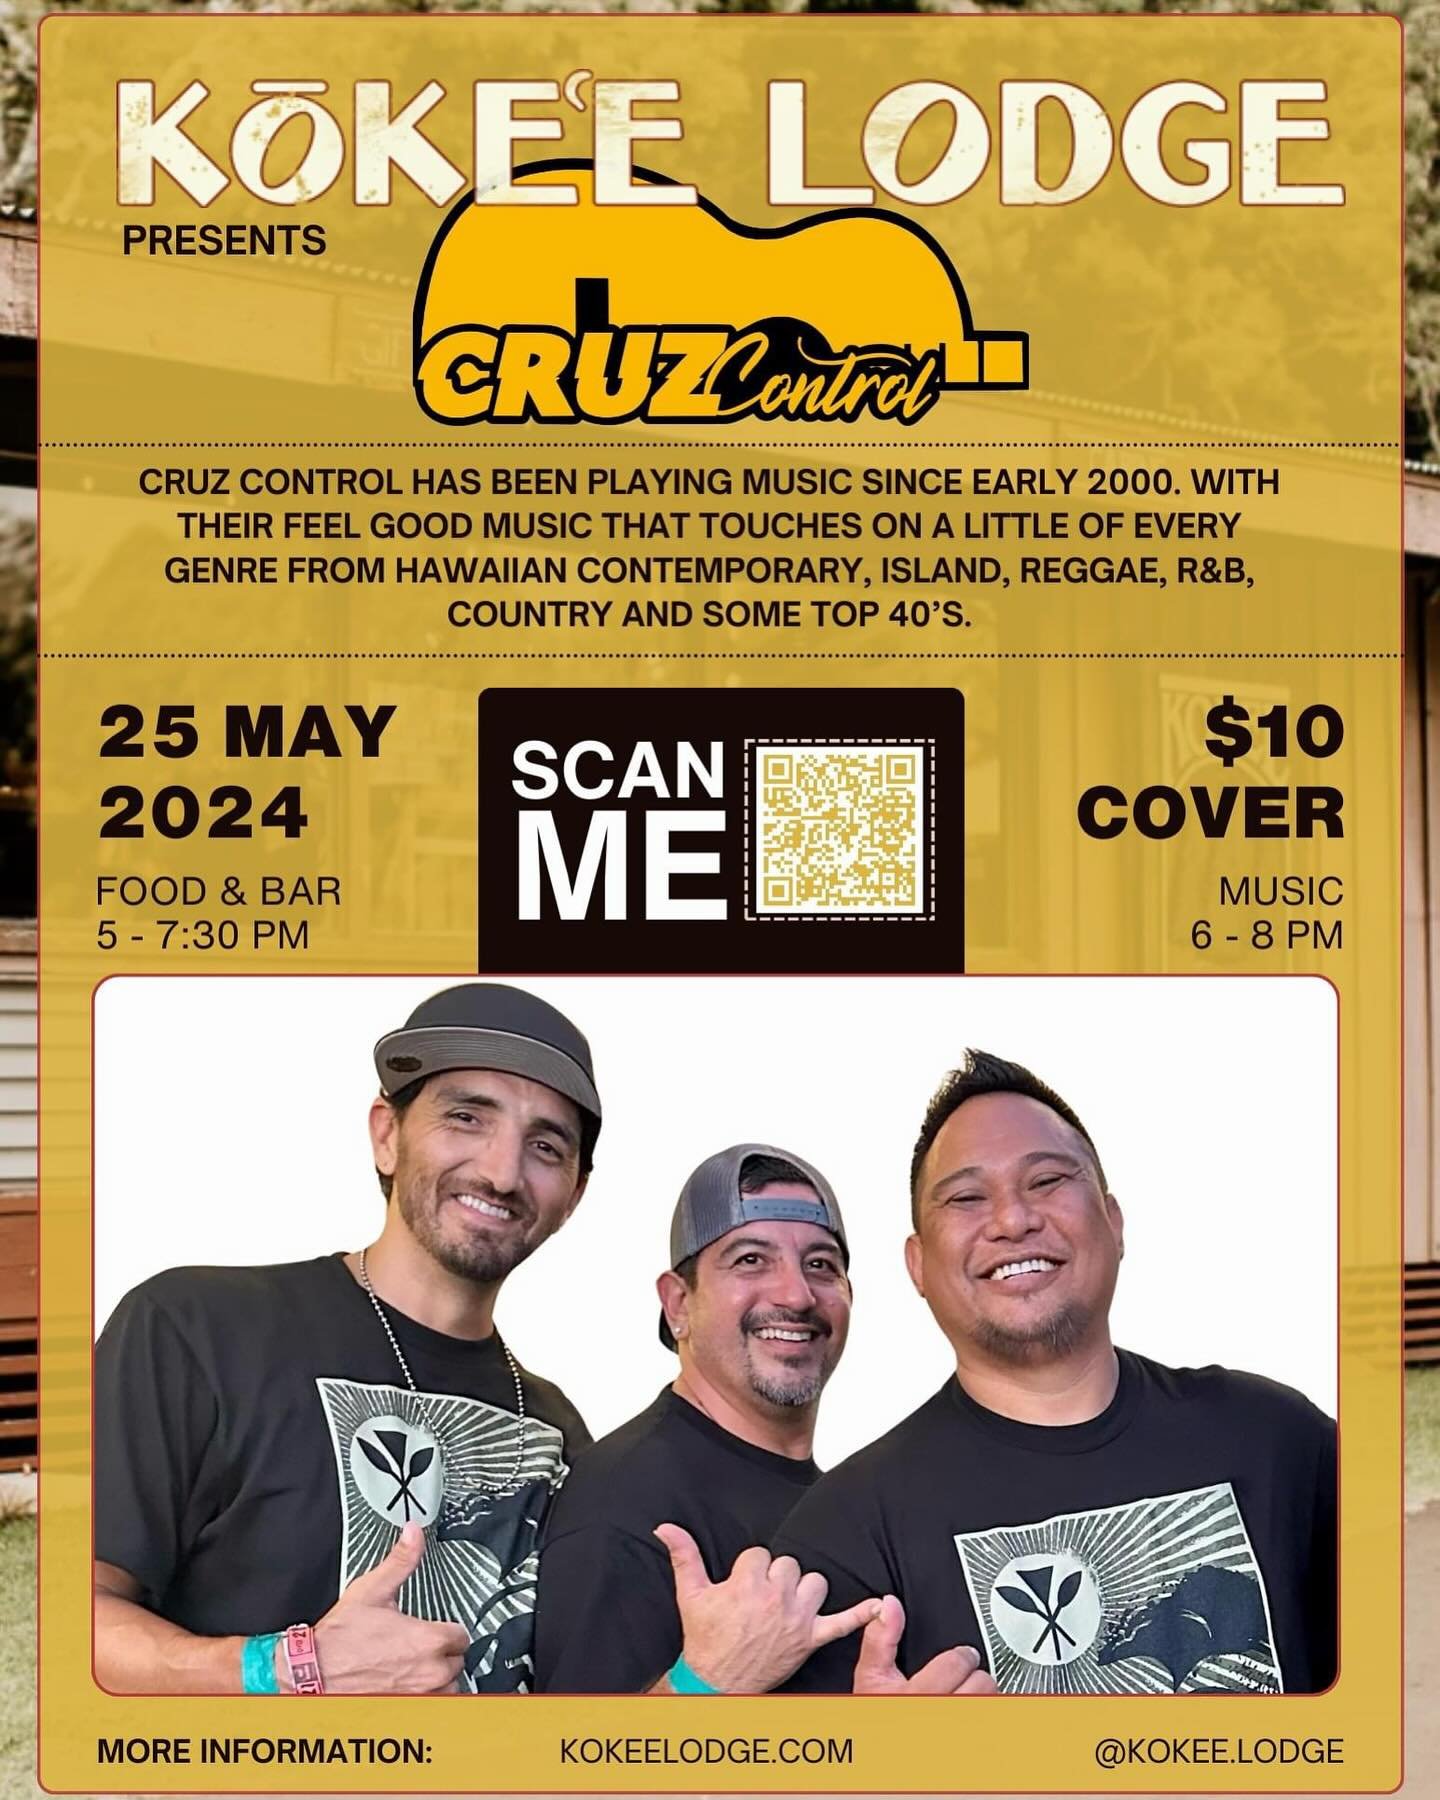 🎸🎤May 25th, Cruz Control at the Kōkeʻe Lodge🎸🎤

Cruz Control has been playing music since early 2000. With their feel good music that touches on a little of every genre from Hawaiian contemporary, island, reggae, R&amp;B, Country and some top 40&